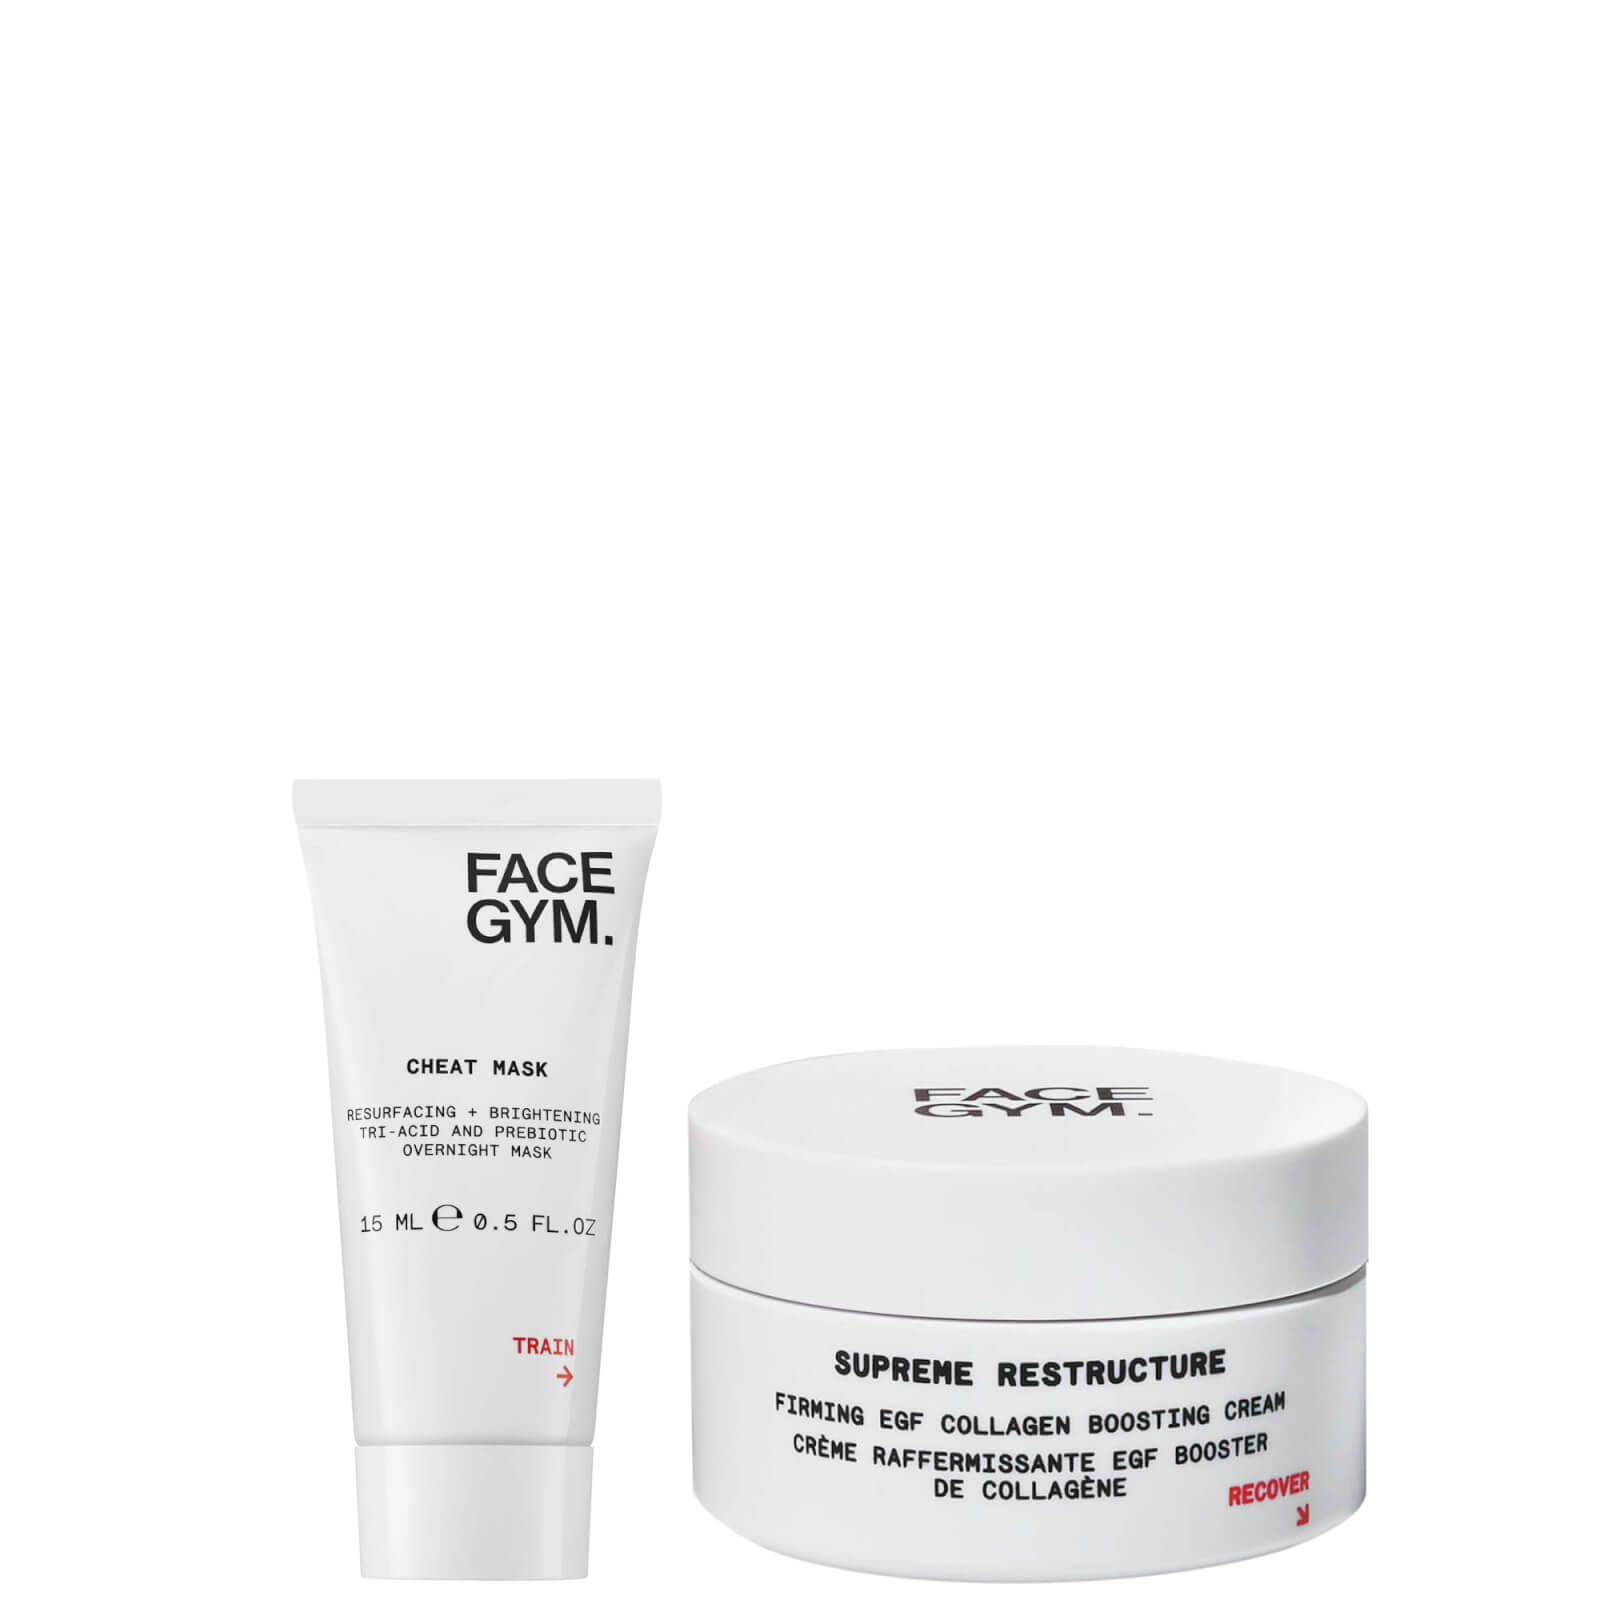 FaceGym Supreme Restructure Firming EGF Collagen Boosting Cream (Various Sizes) - 15ml